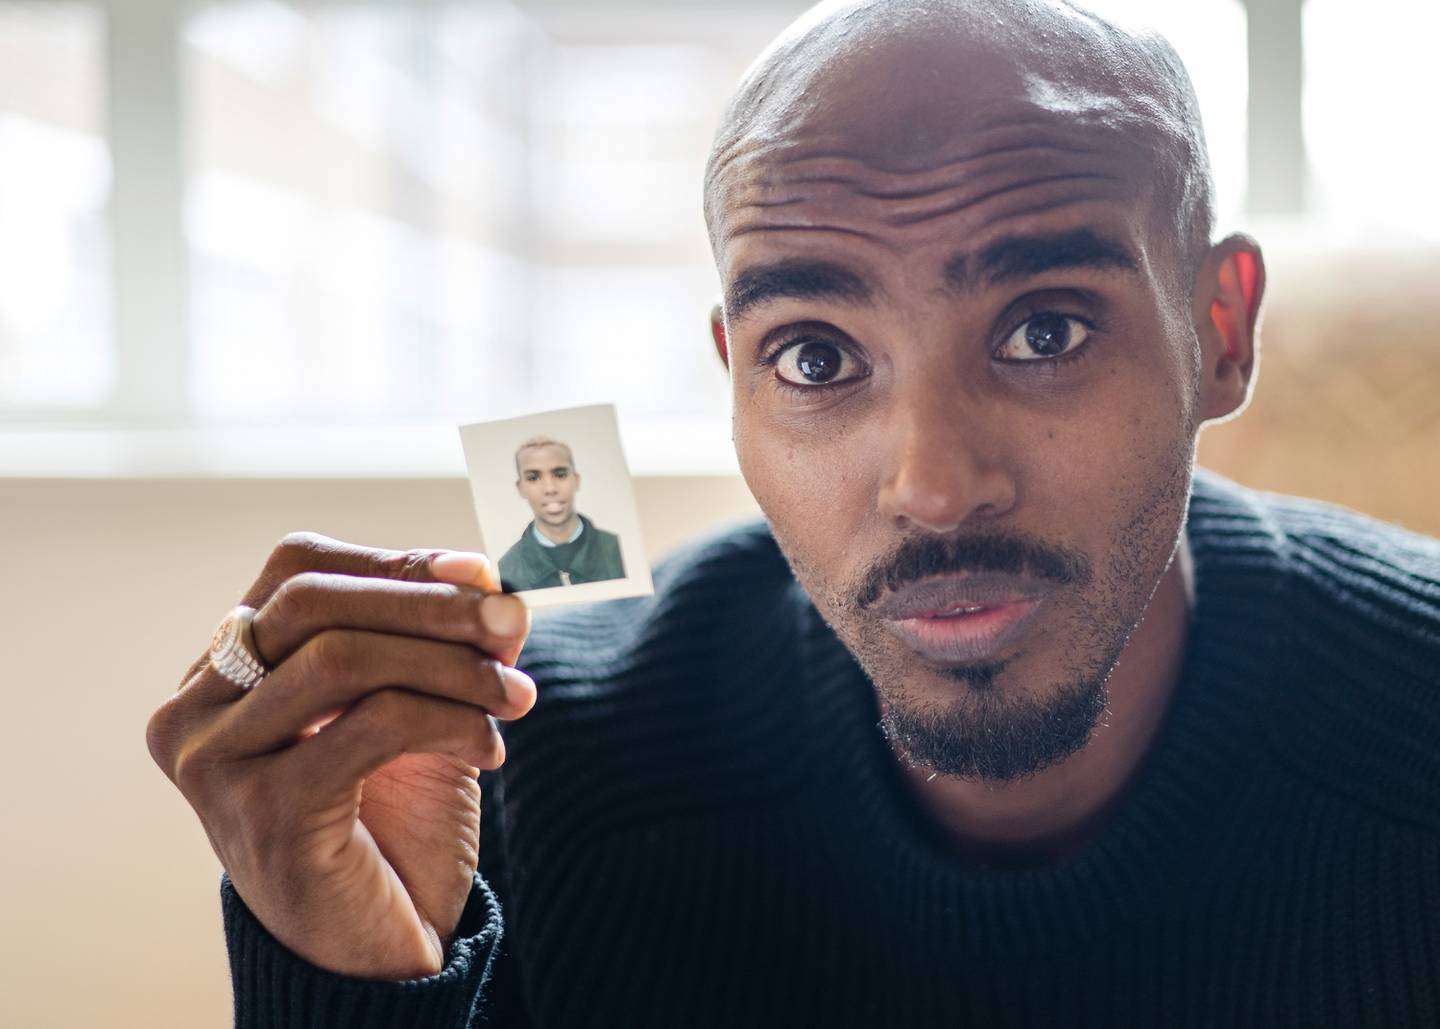 Sir Mo Farah holds a picture of himself as a child during the filming of the BBC documentary, 'The Real Mo Farah'. BBC / PA